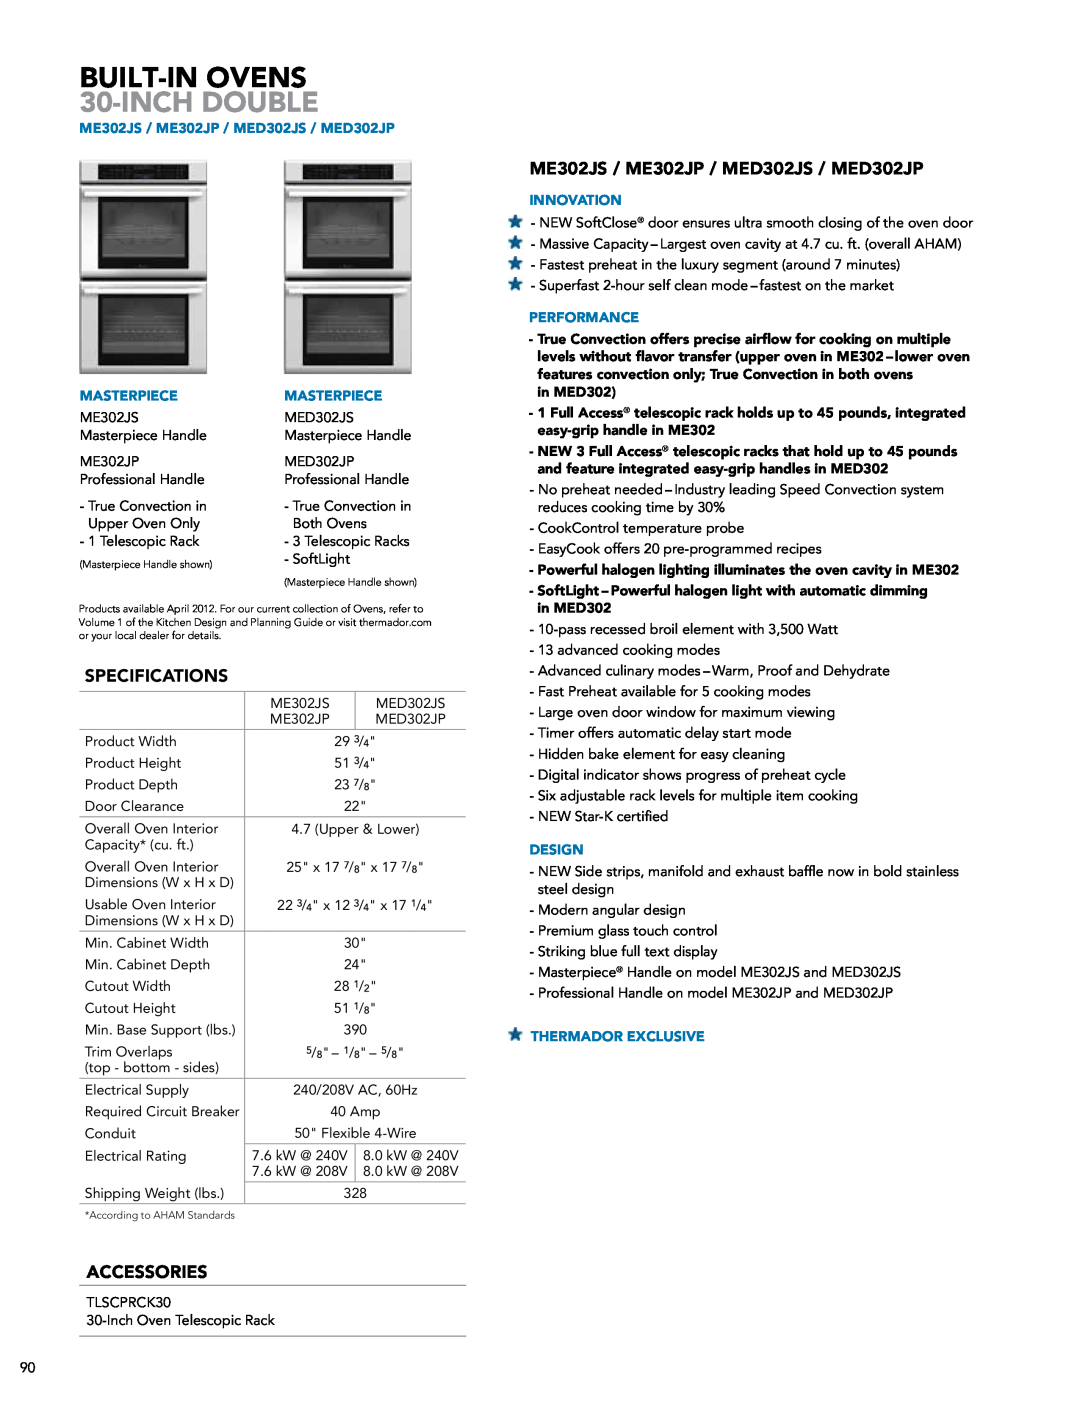 Thermador DWHD651JFP, PODMW301J manual BUILT-IN OVENS 30-INCH DOUBLE, in MED302 